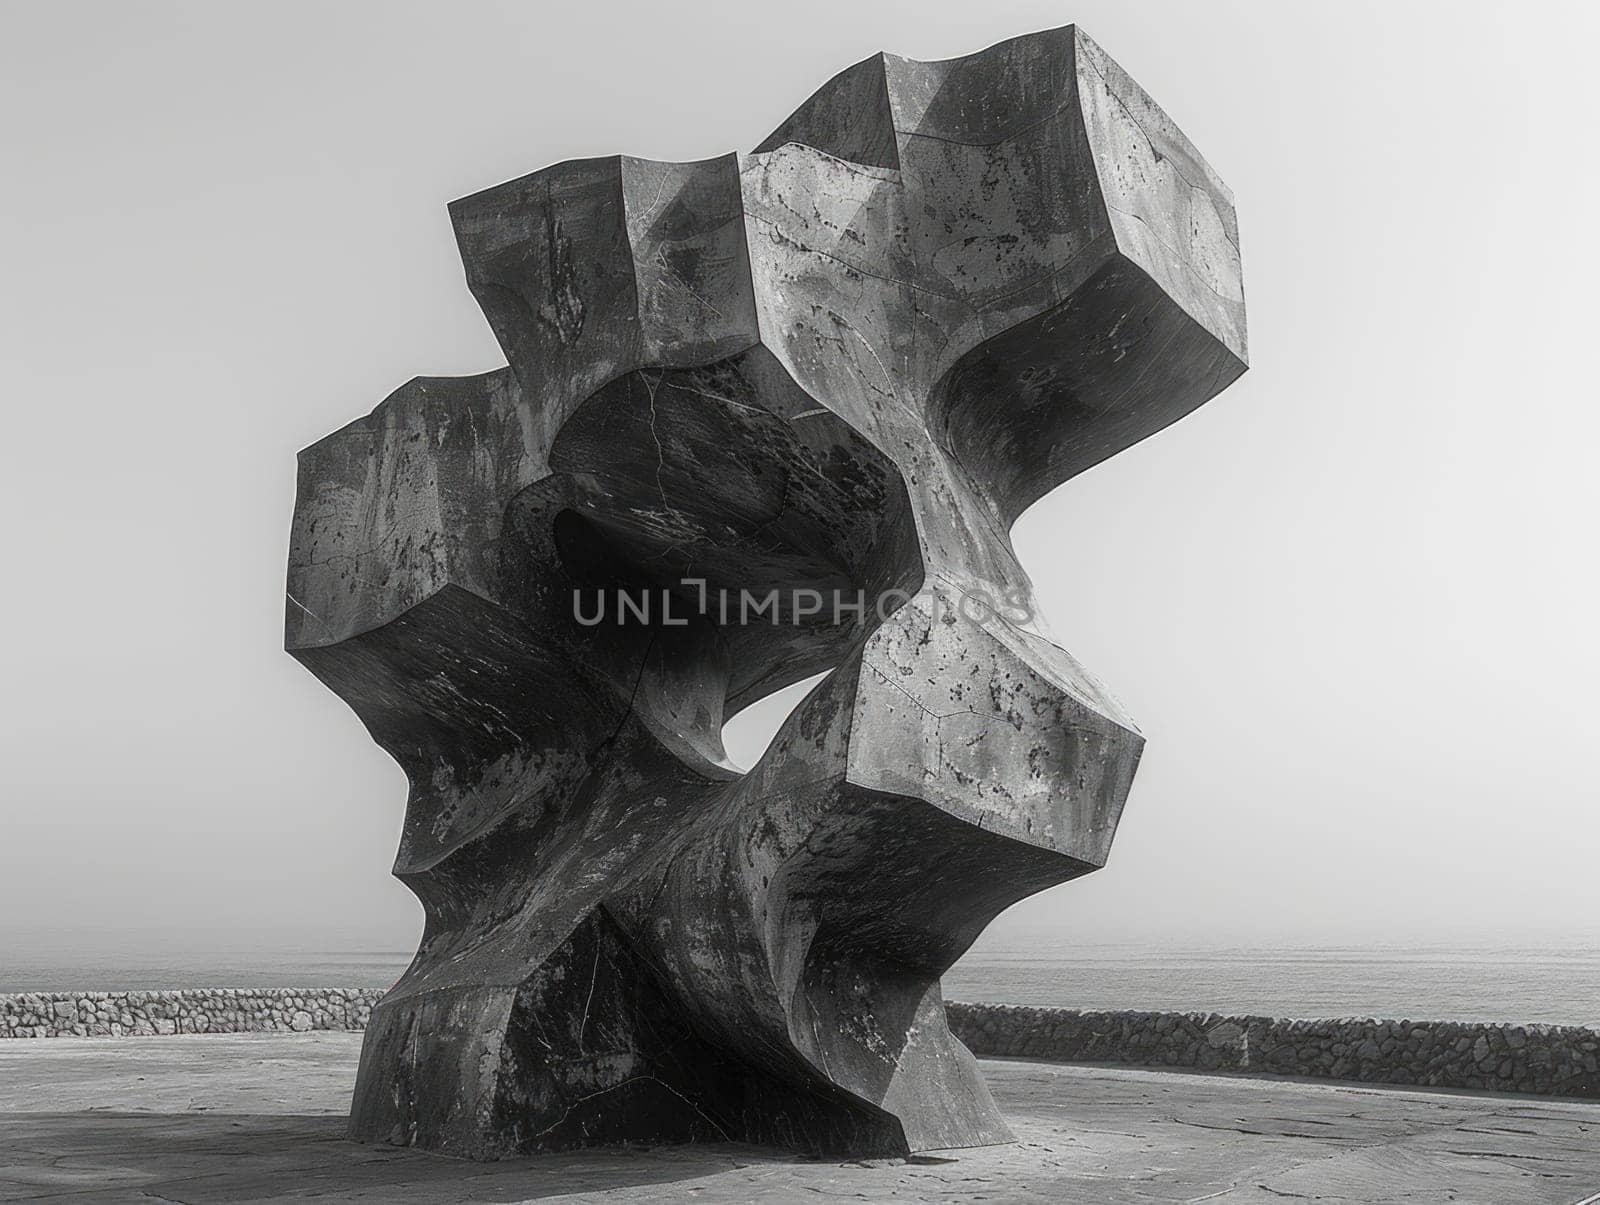 A black and white sculpture captured in intricate detail, showcasing its form and texture.